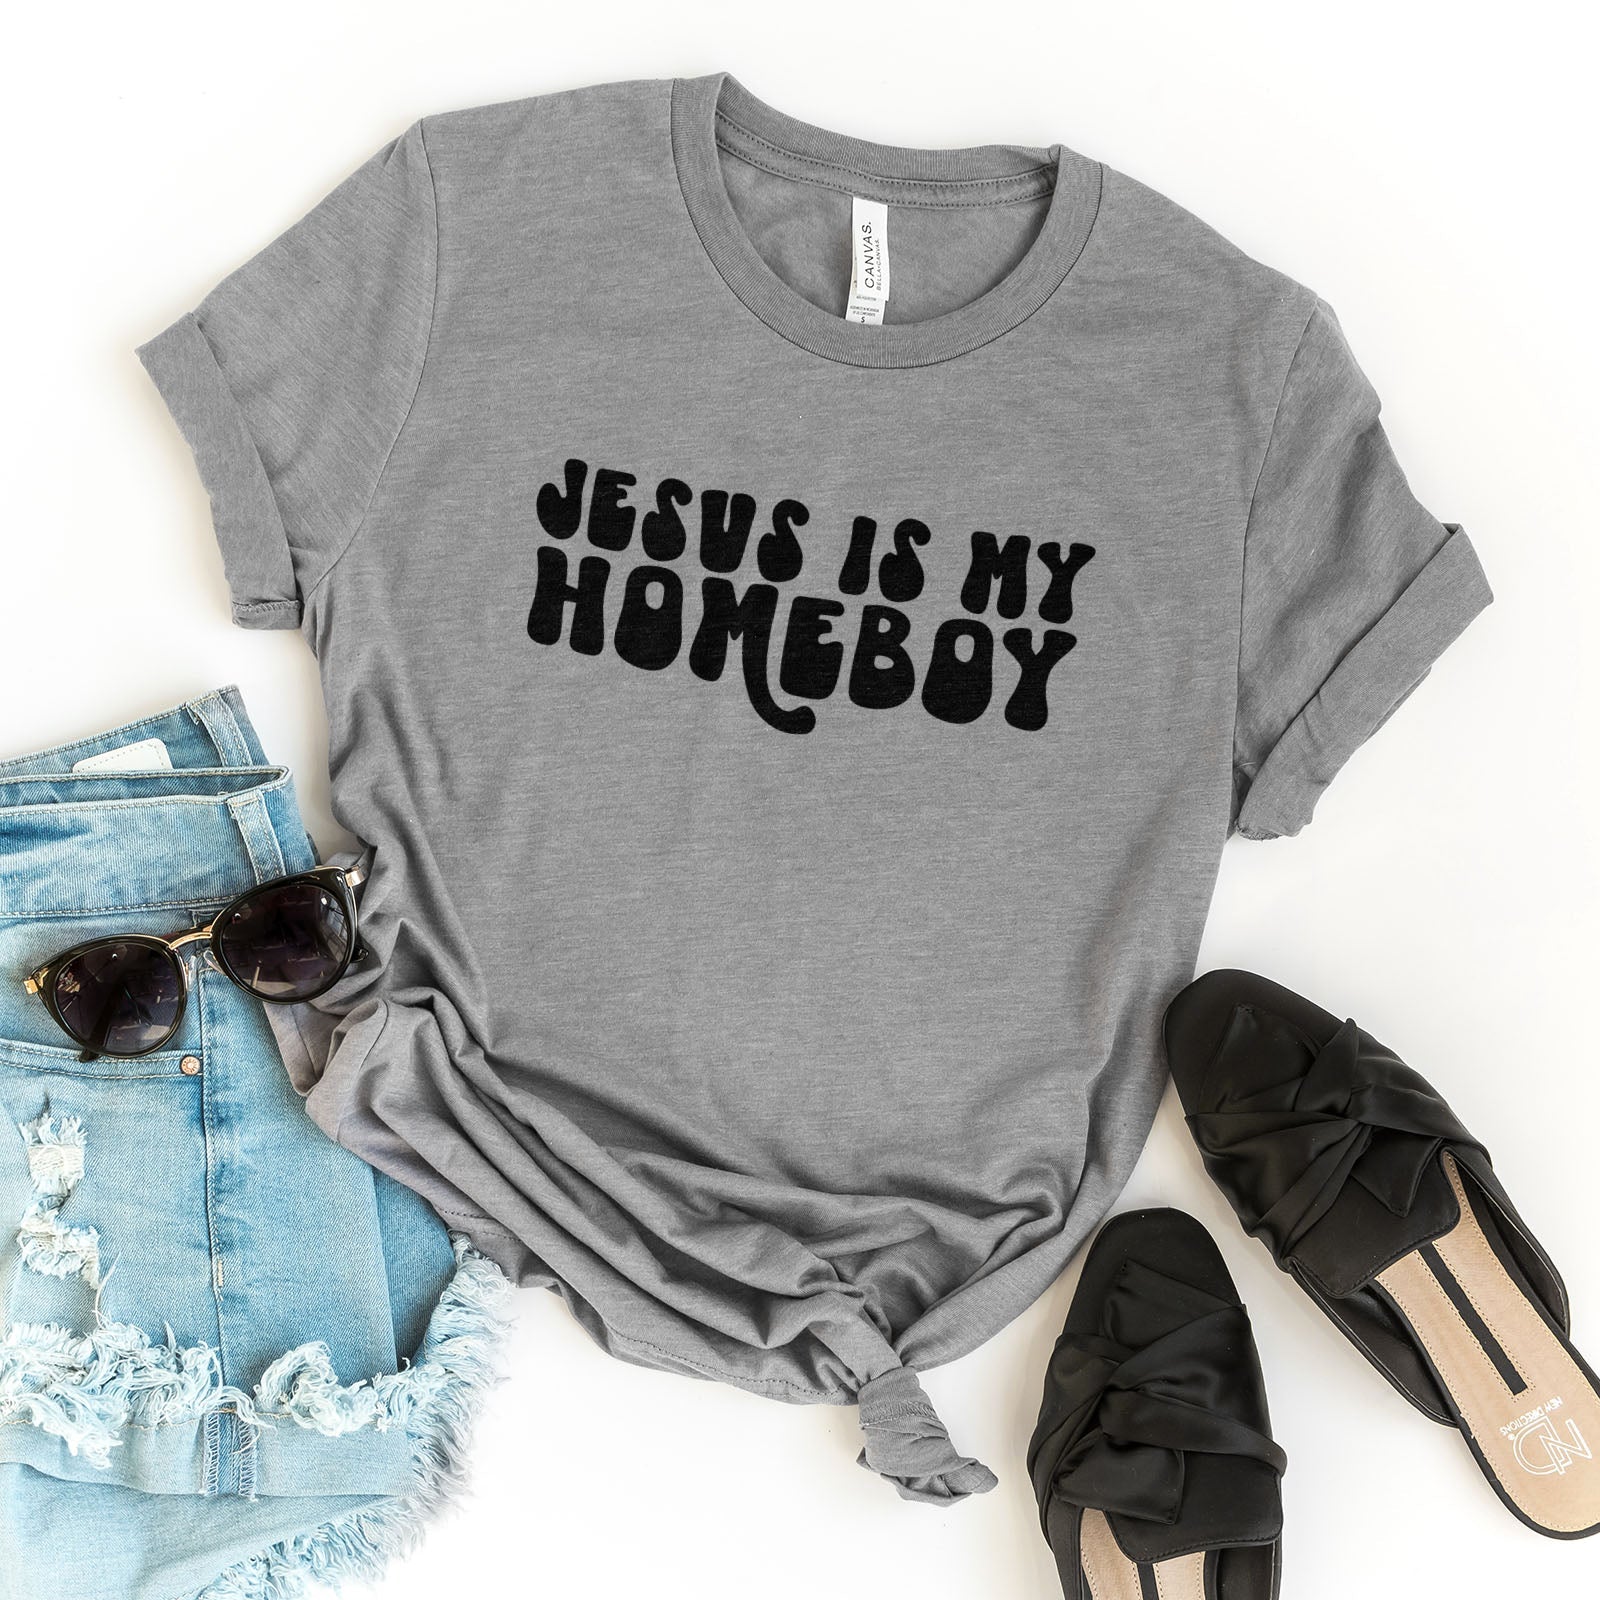 Jesus Is My Homeboy Tee Shirts For Women - Christian Shirts for Women - Religious Tee Shirts